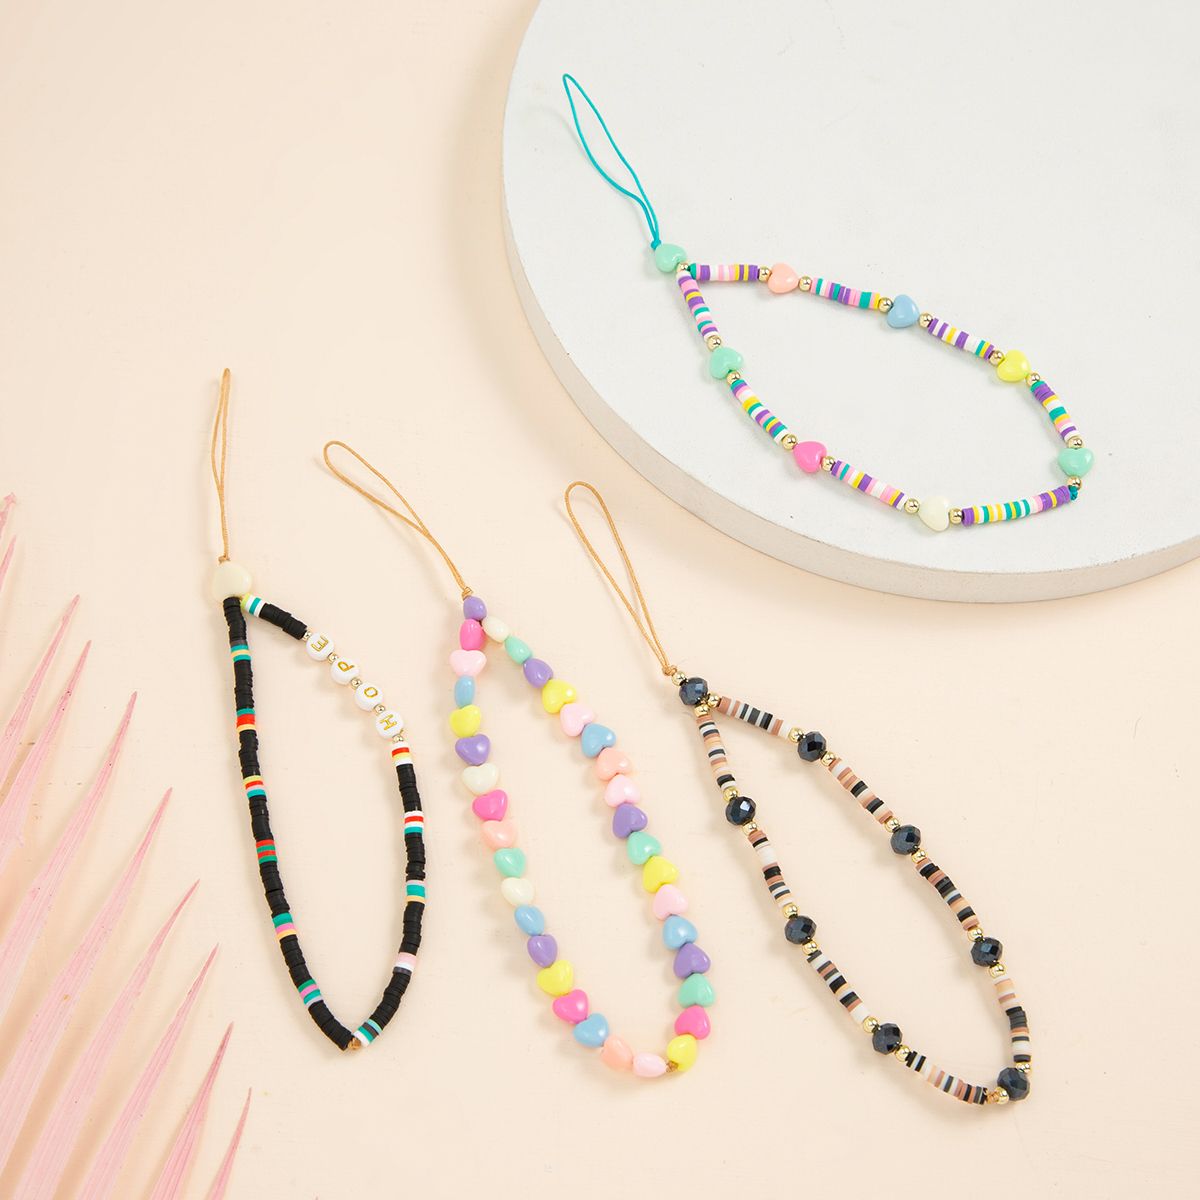 SWRJGM SHOP Women Acrylic Bead Colorful Simple Mobile Phone Strap Lanyard Cell Phone Case Hanging Cord Phone Chain Soft Pottery Rope